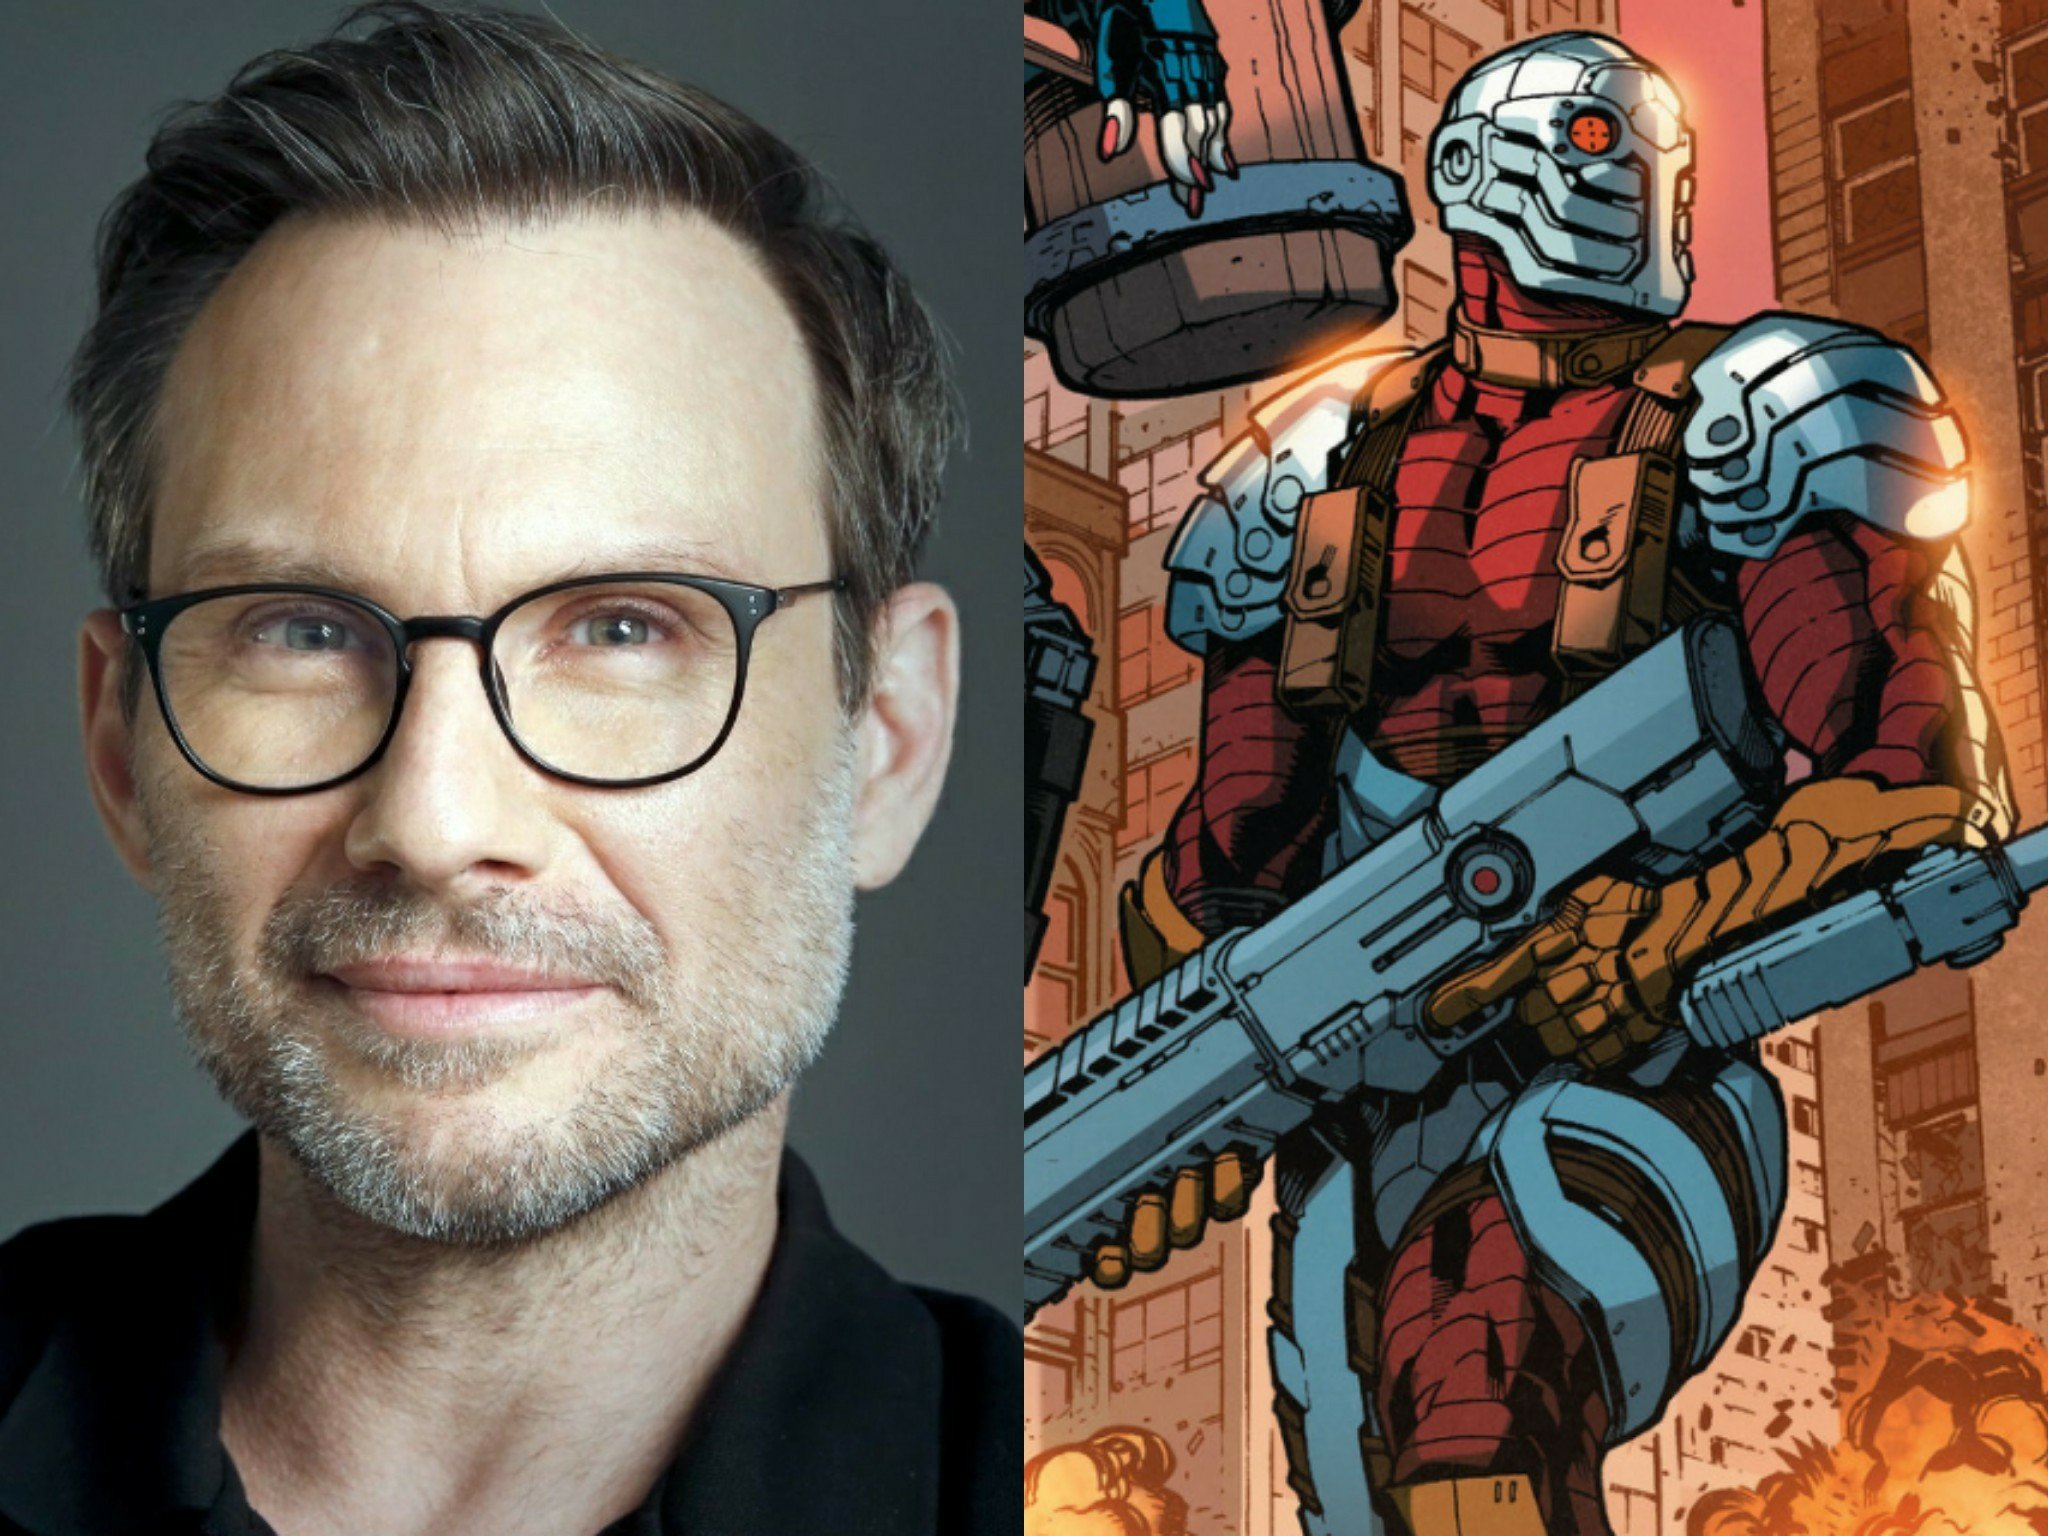 Suicide Squad: Hell to Pay Cast, Images Revealed